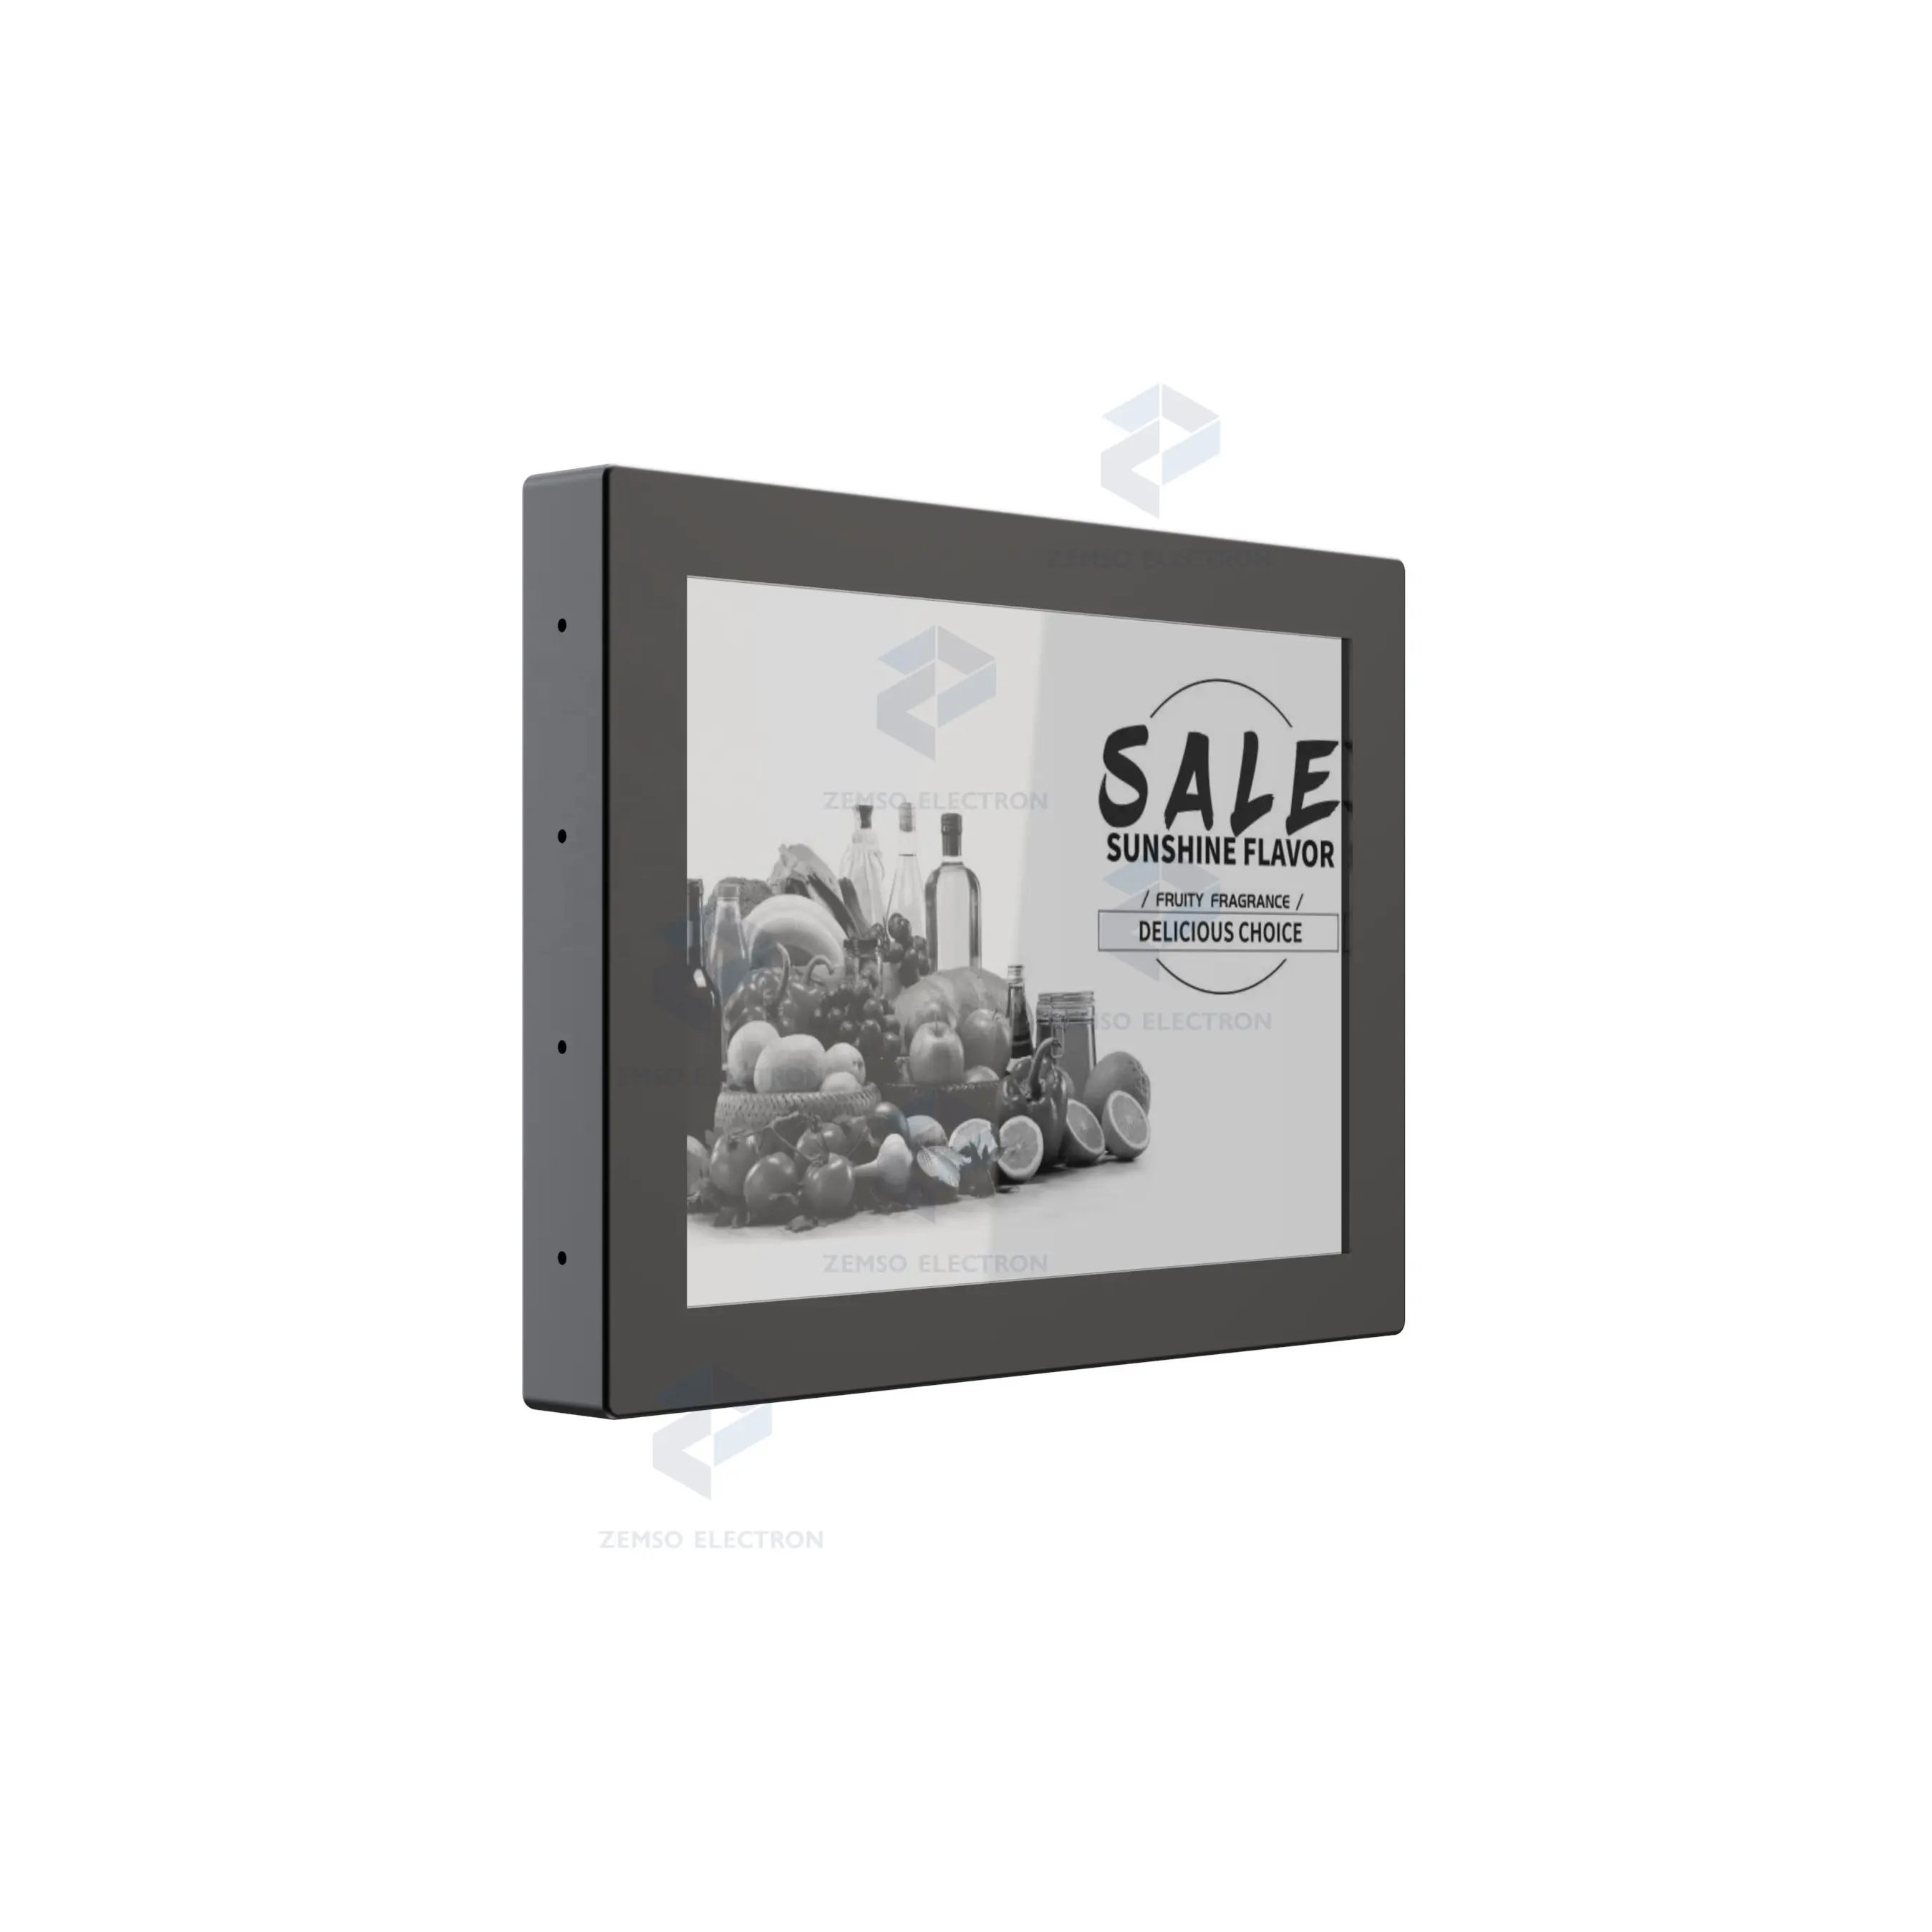 Outdoor e-paper display 13.3 e-ink display panel e book ultra thin e ink color display kindle paper white e-reader